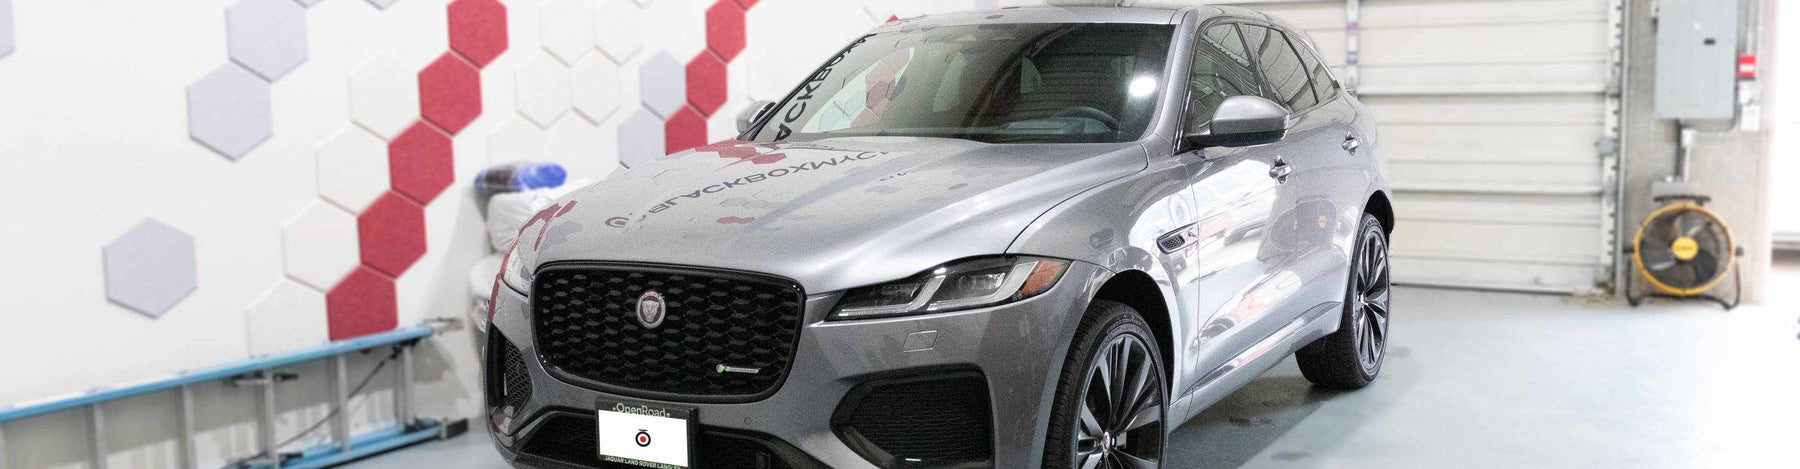 Installing the Thinkware U3000 2-Channel via Hardwiring in a Jaguar F-Pace